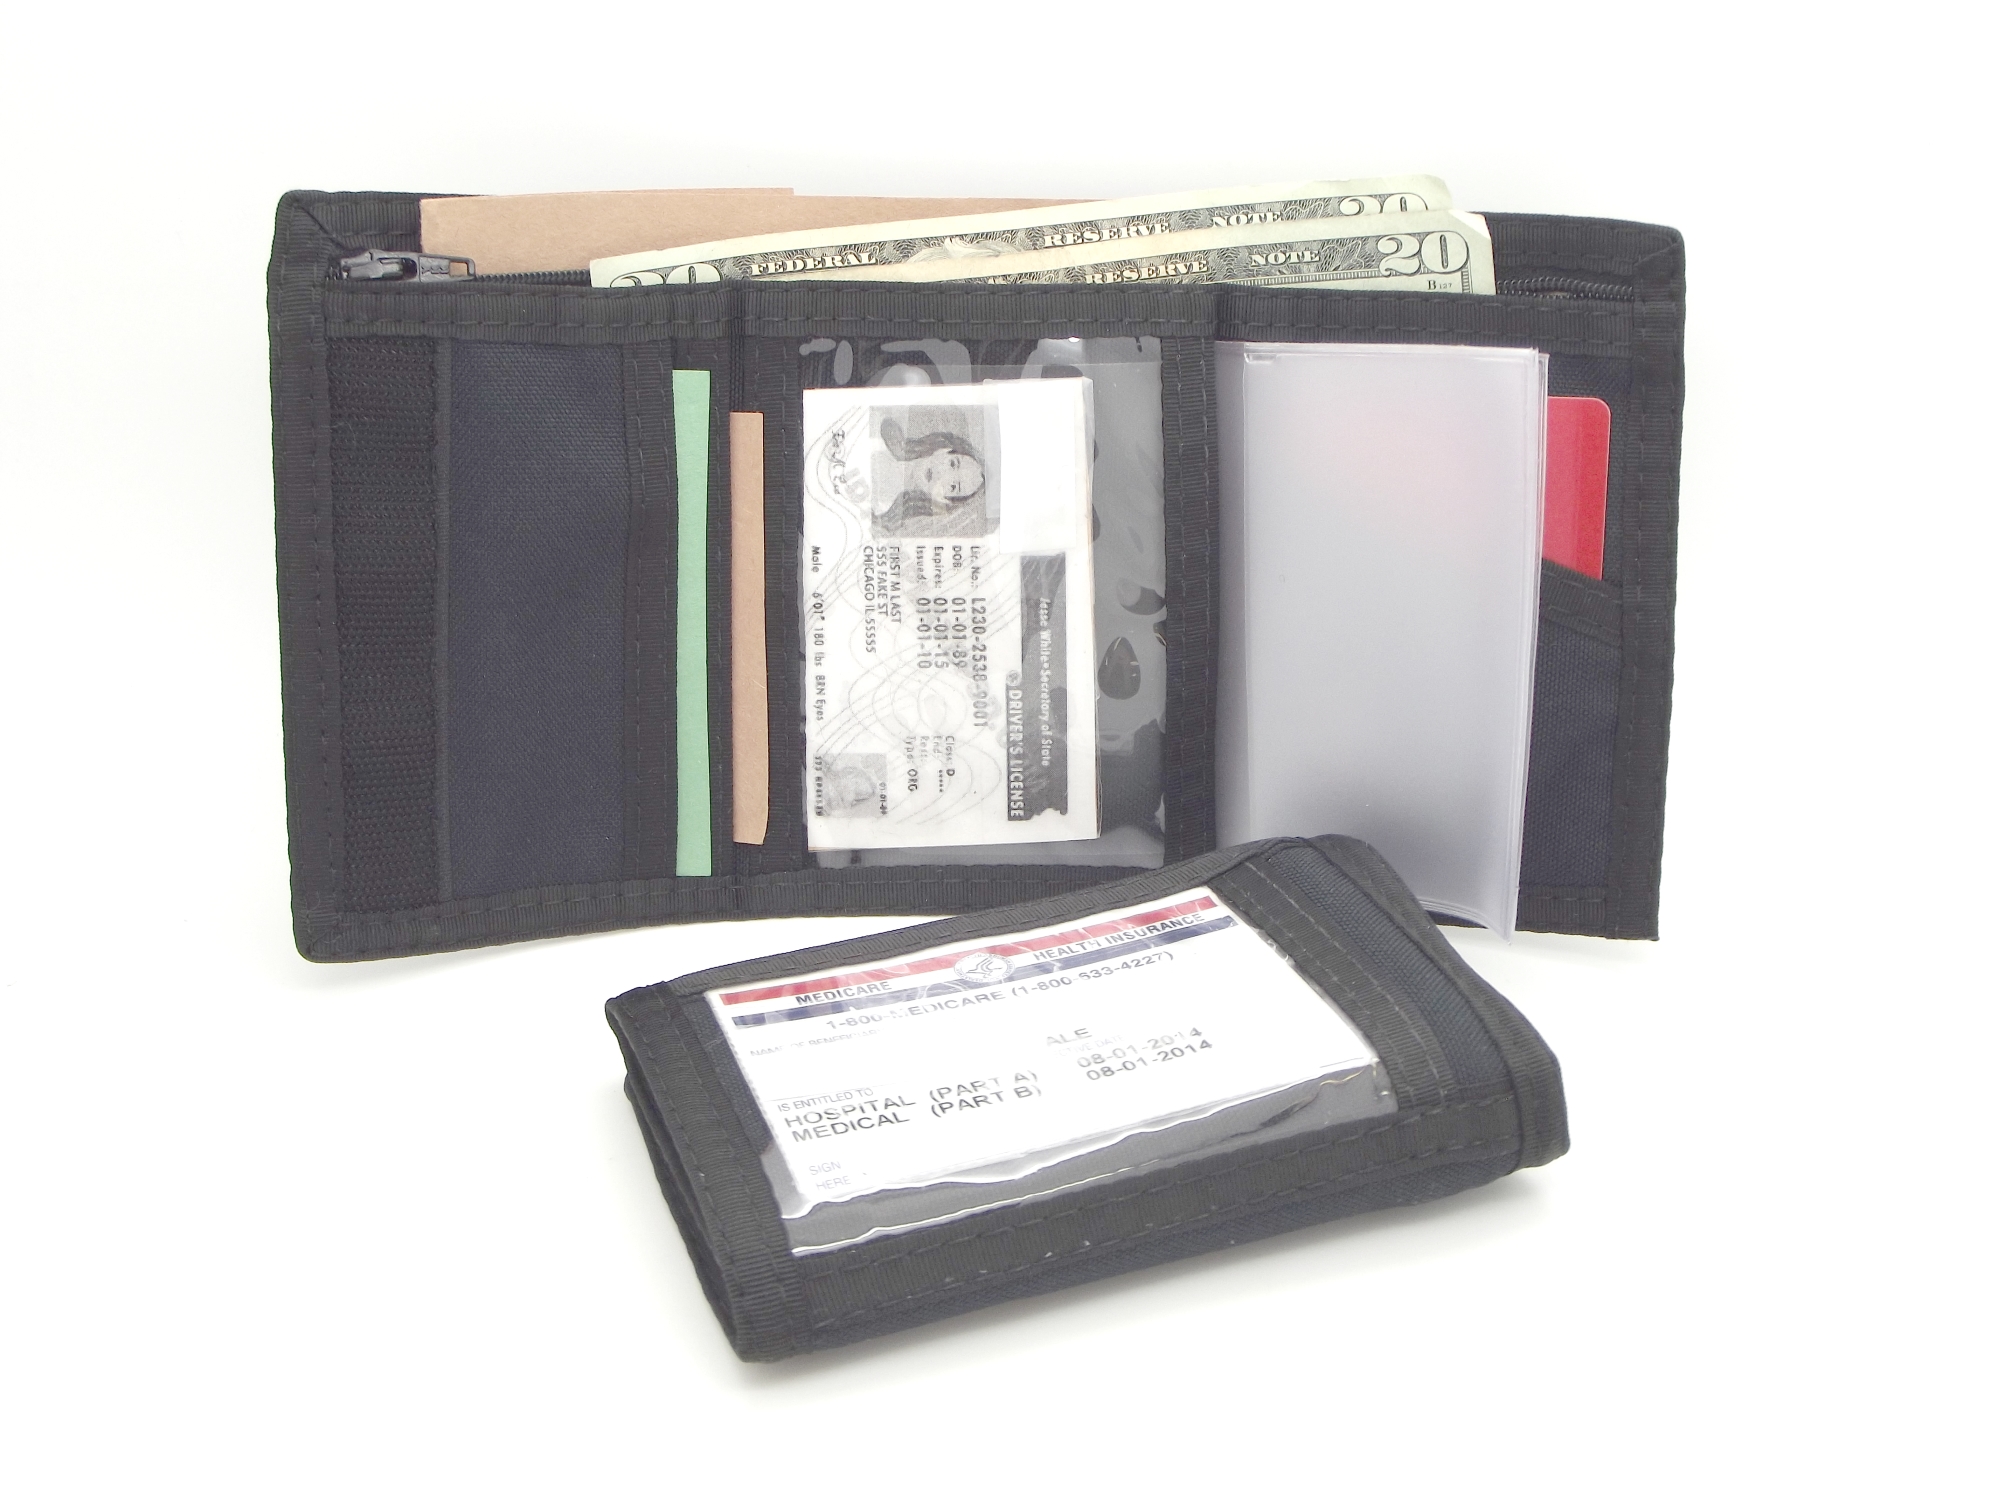 The Bifold Wallet with ID Window